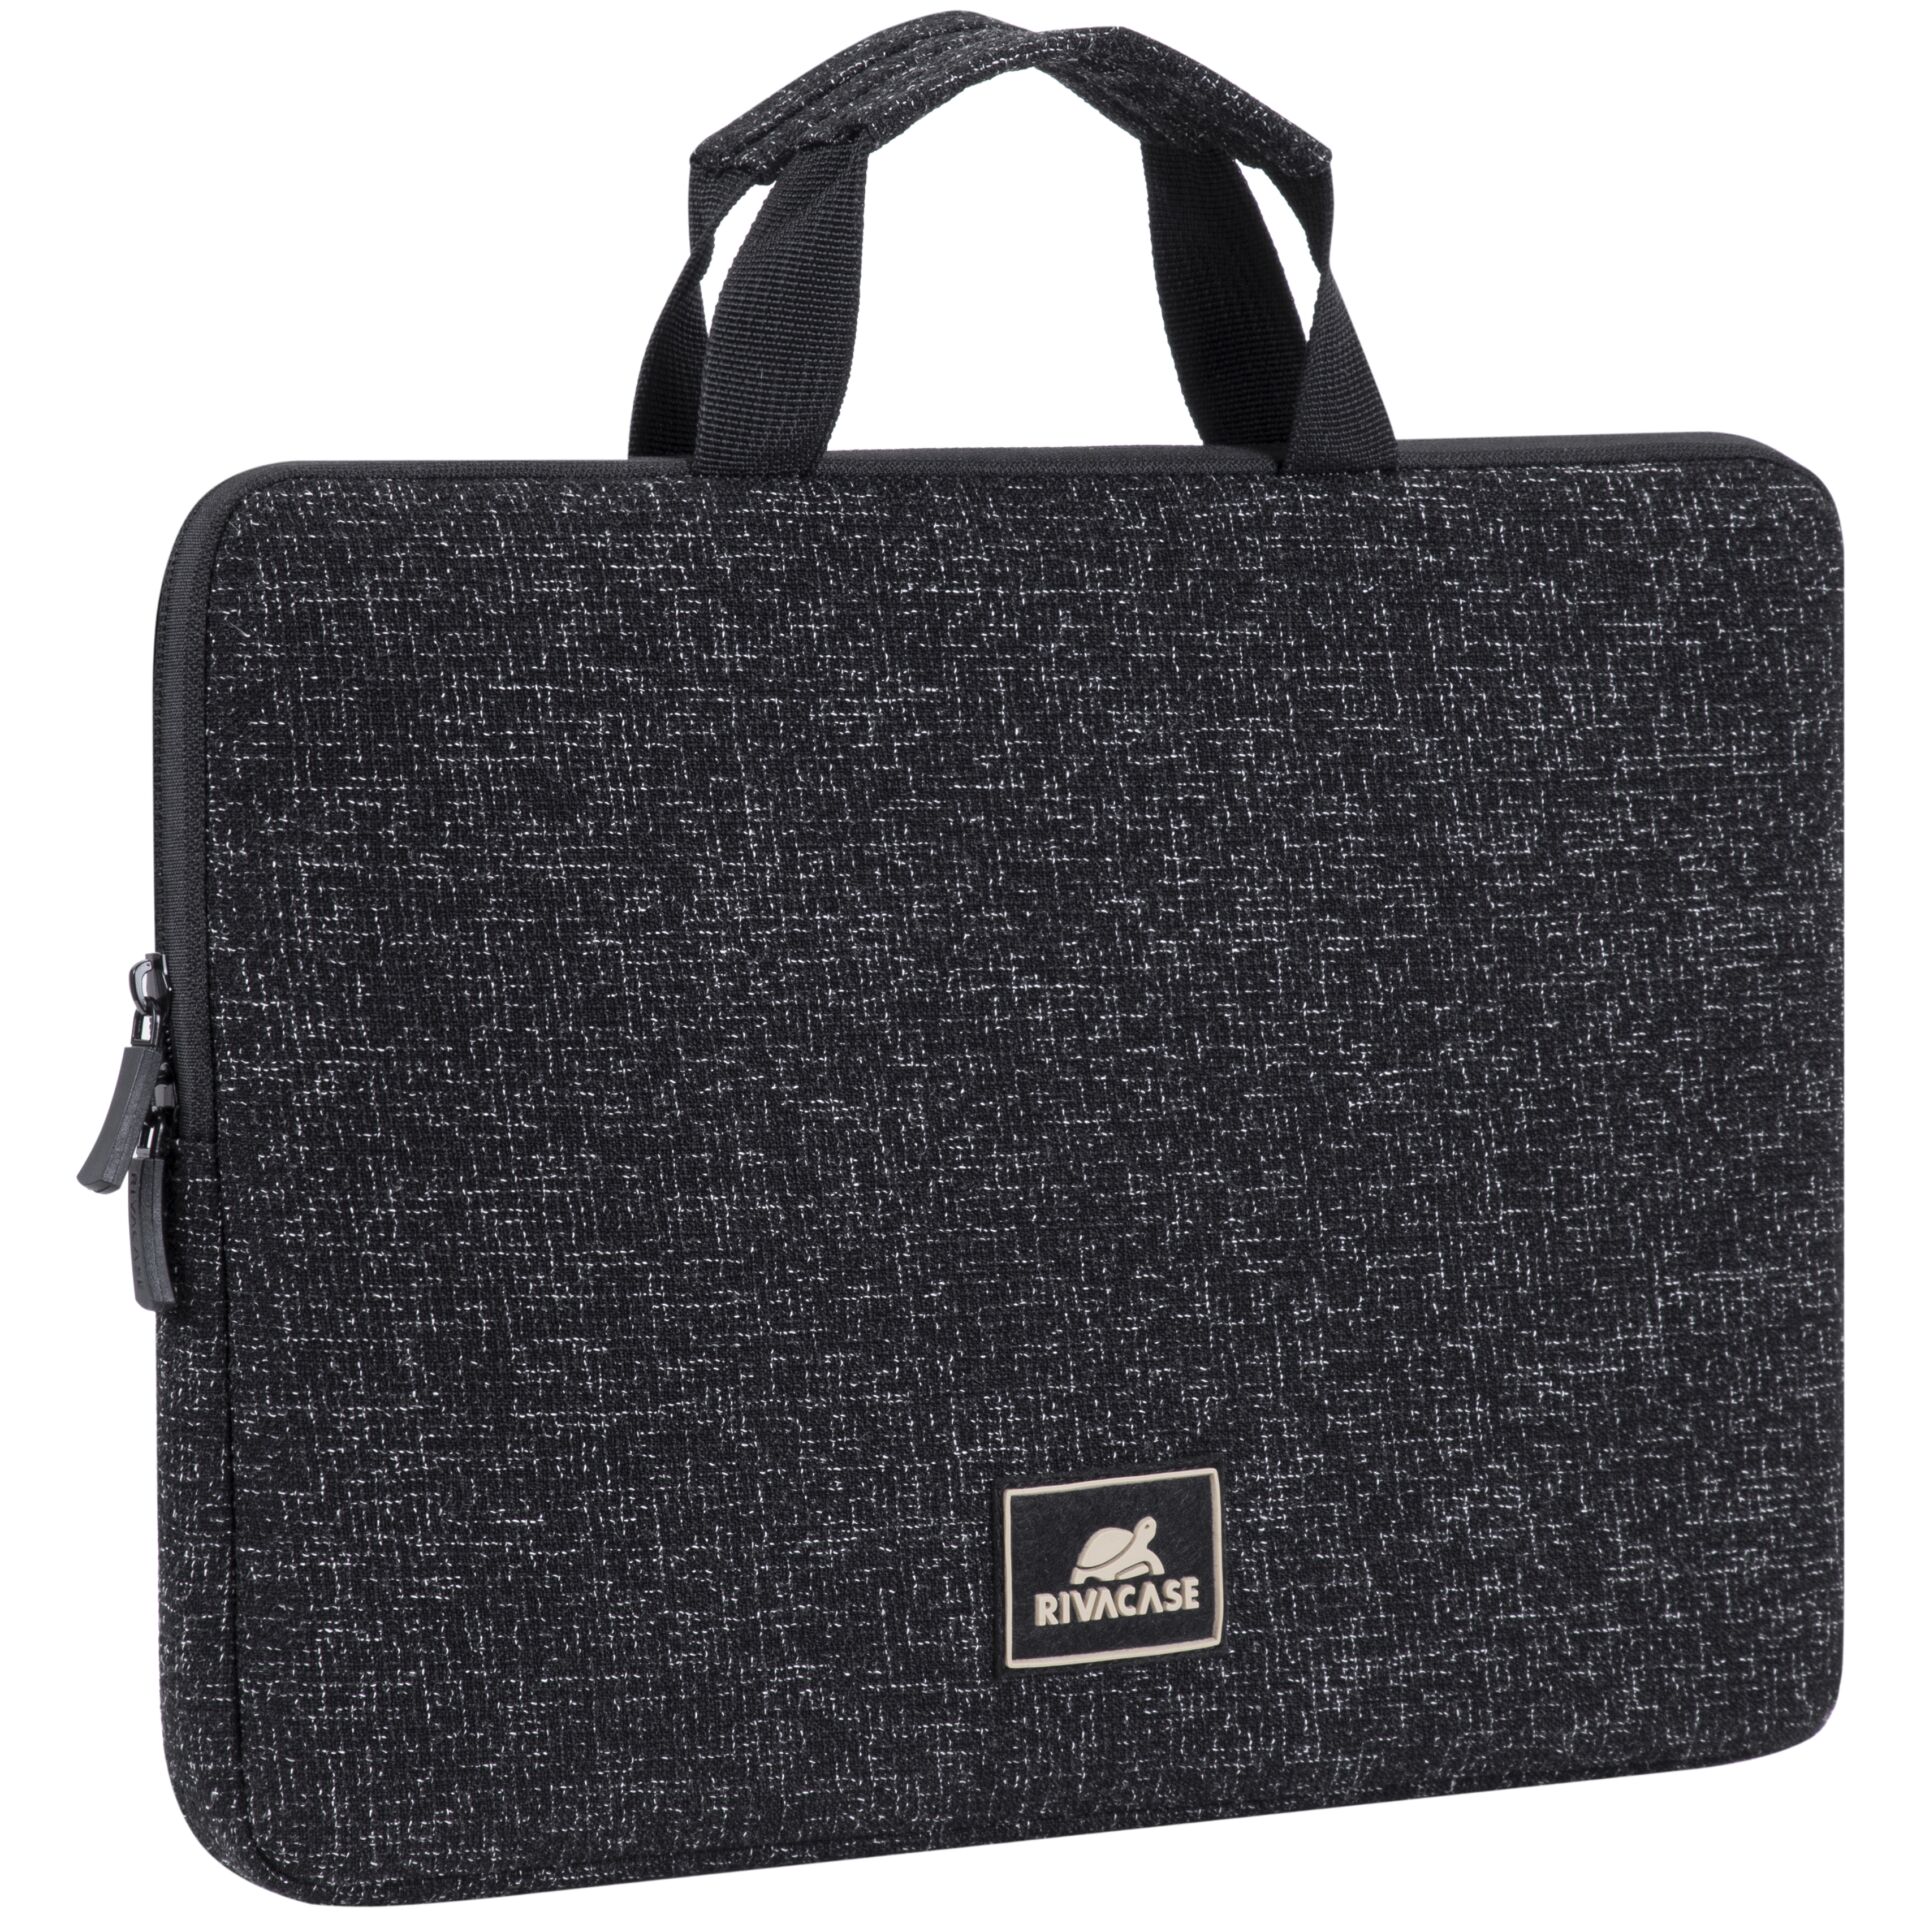 Rivacase 7913 Laptop Sleeve 13.3  with Handles black